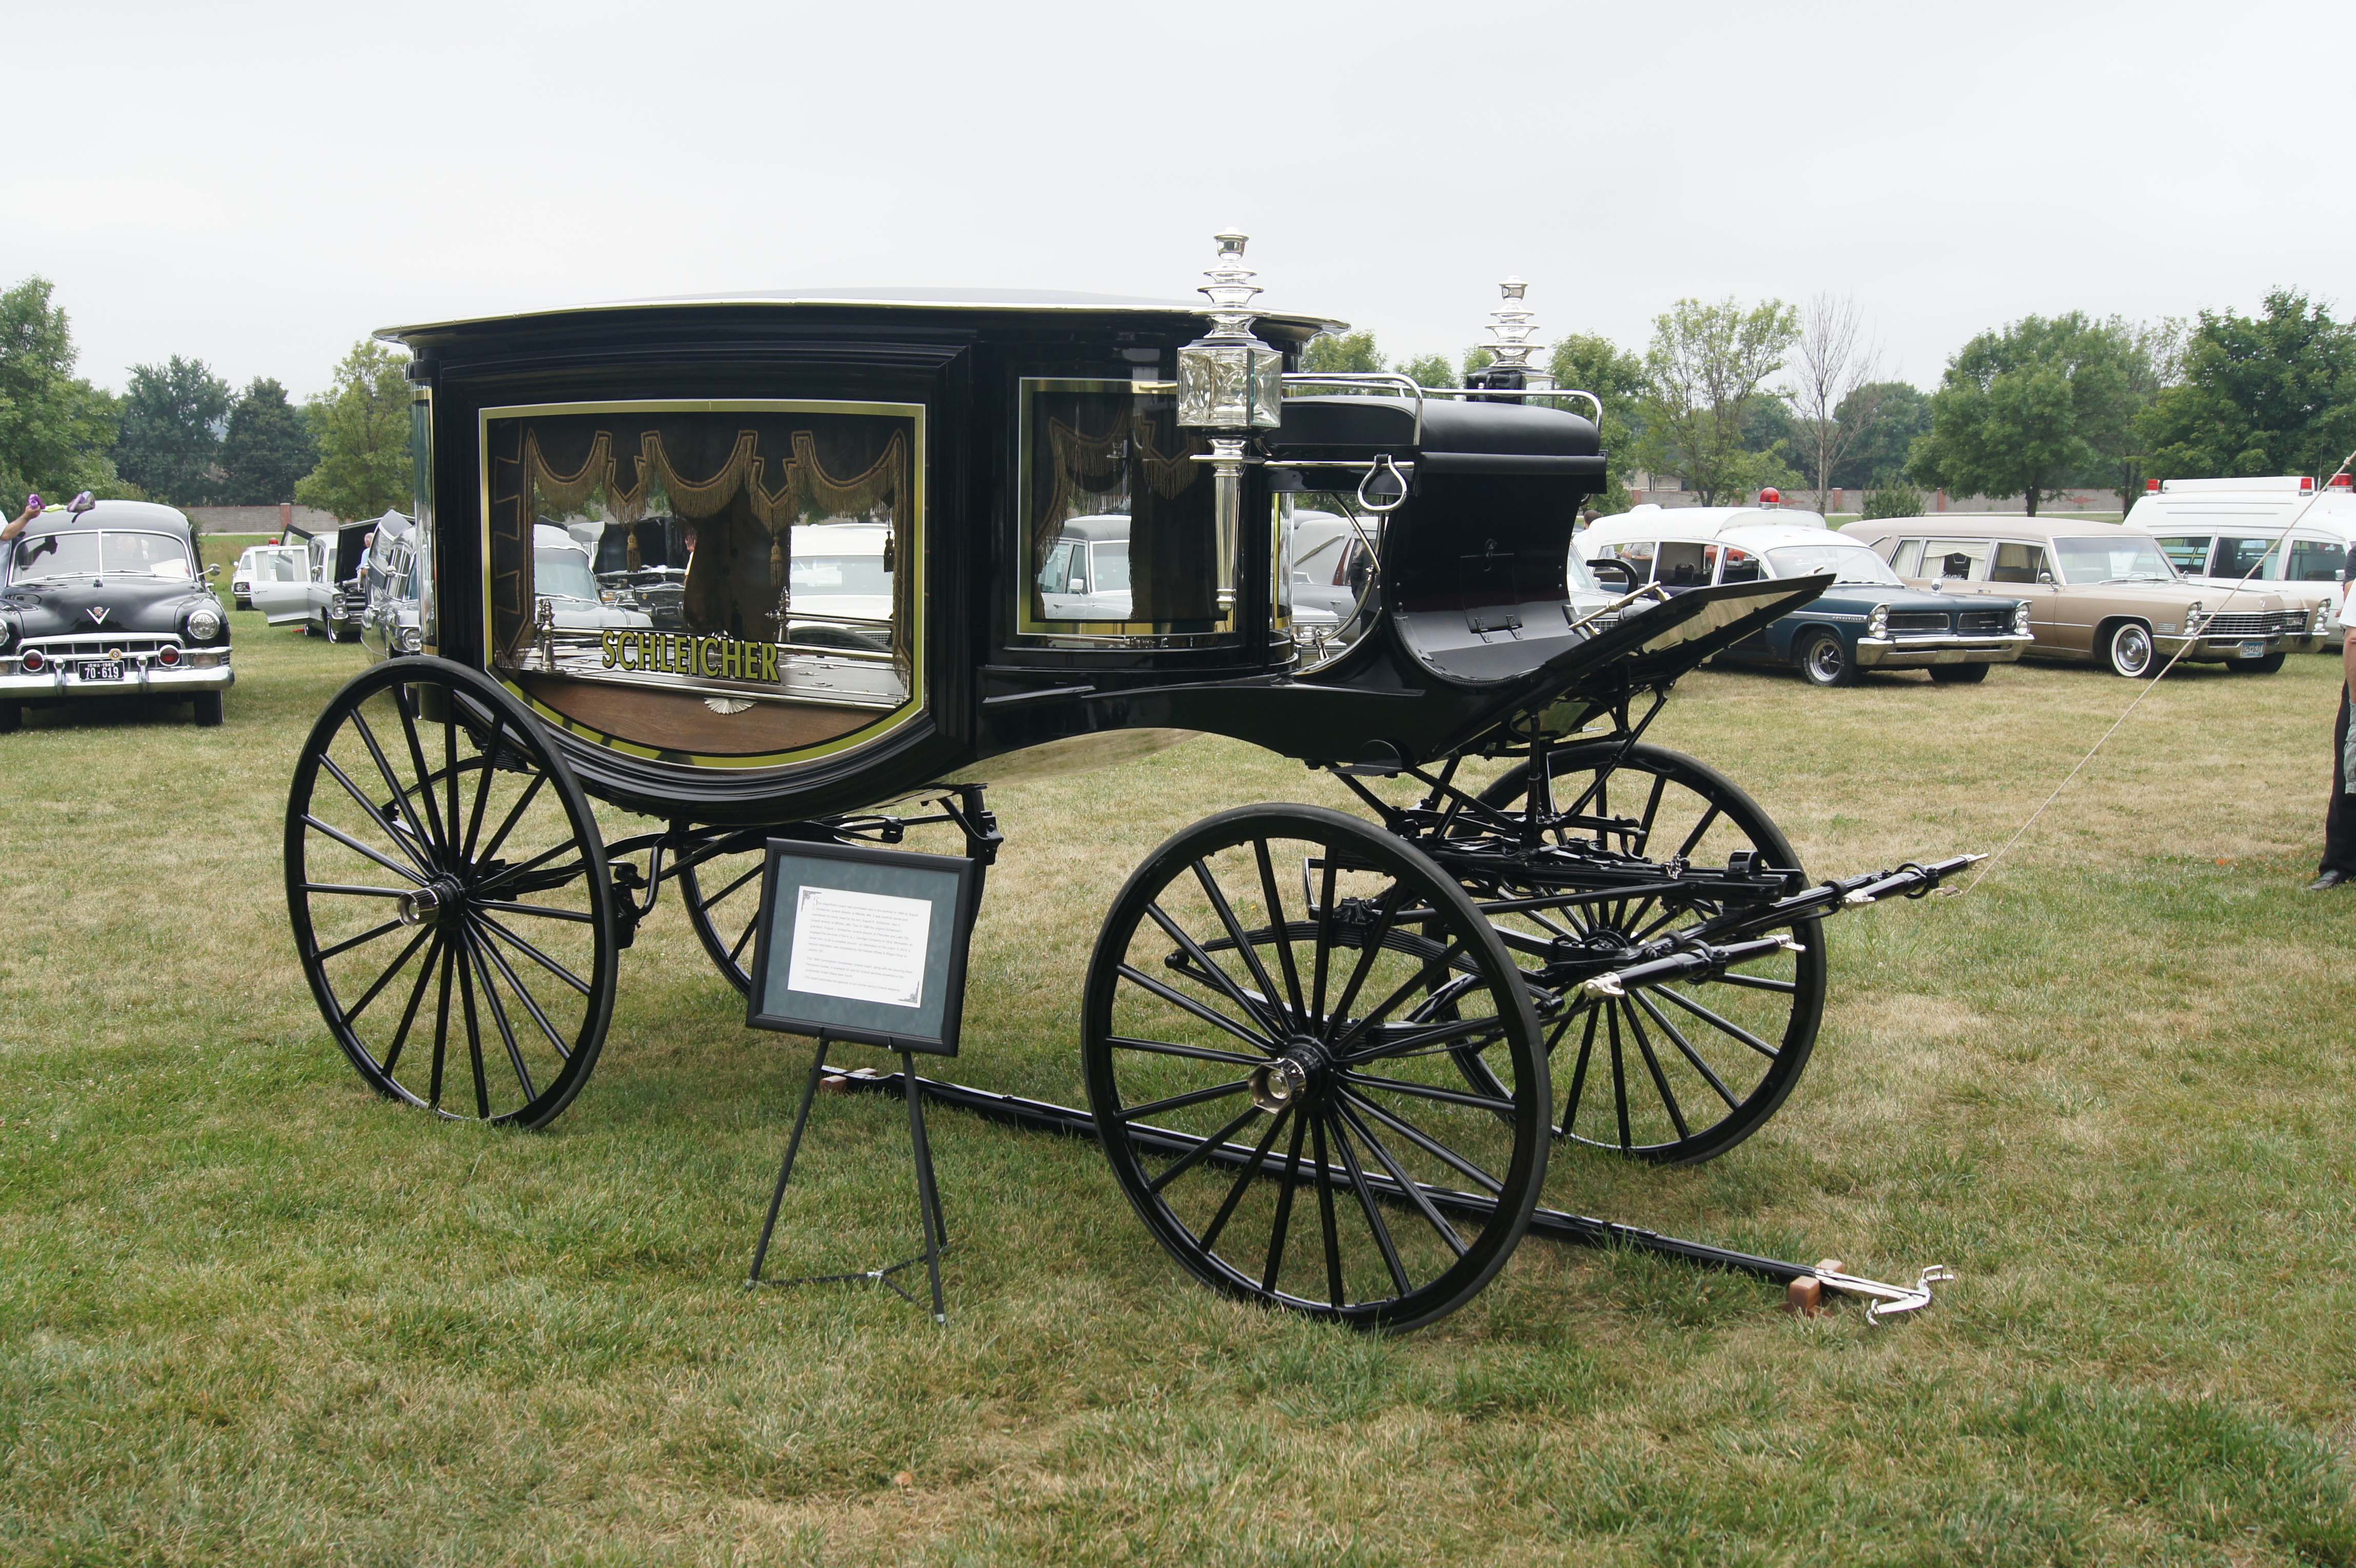 History Behind the Hearse: From Horse-Drawn Carriage to Today